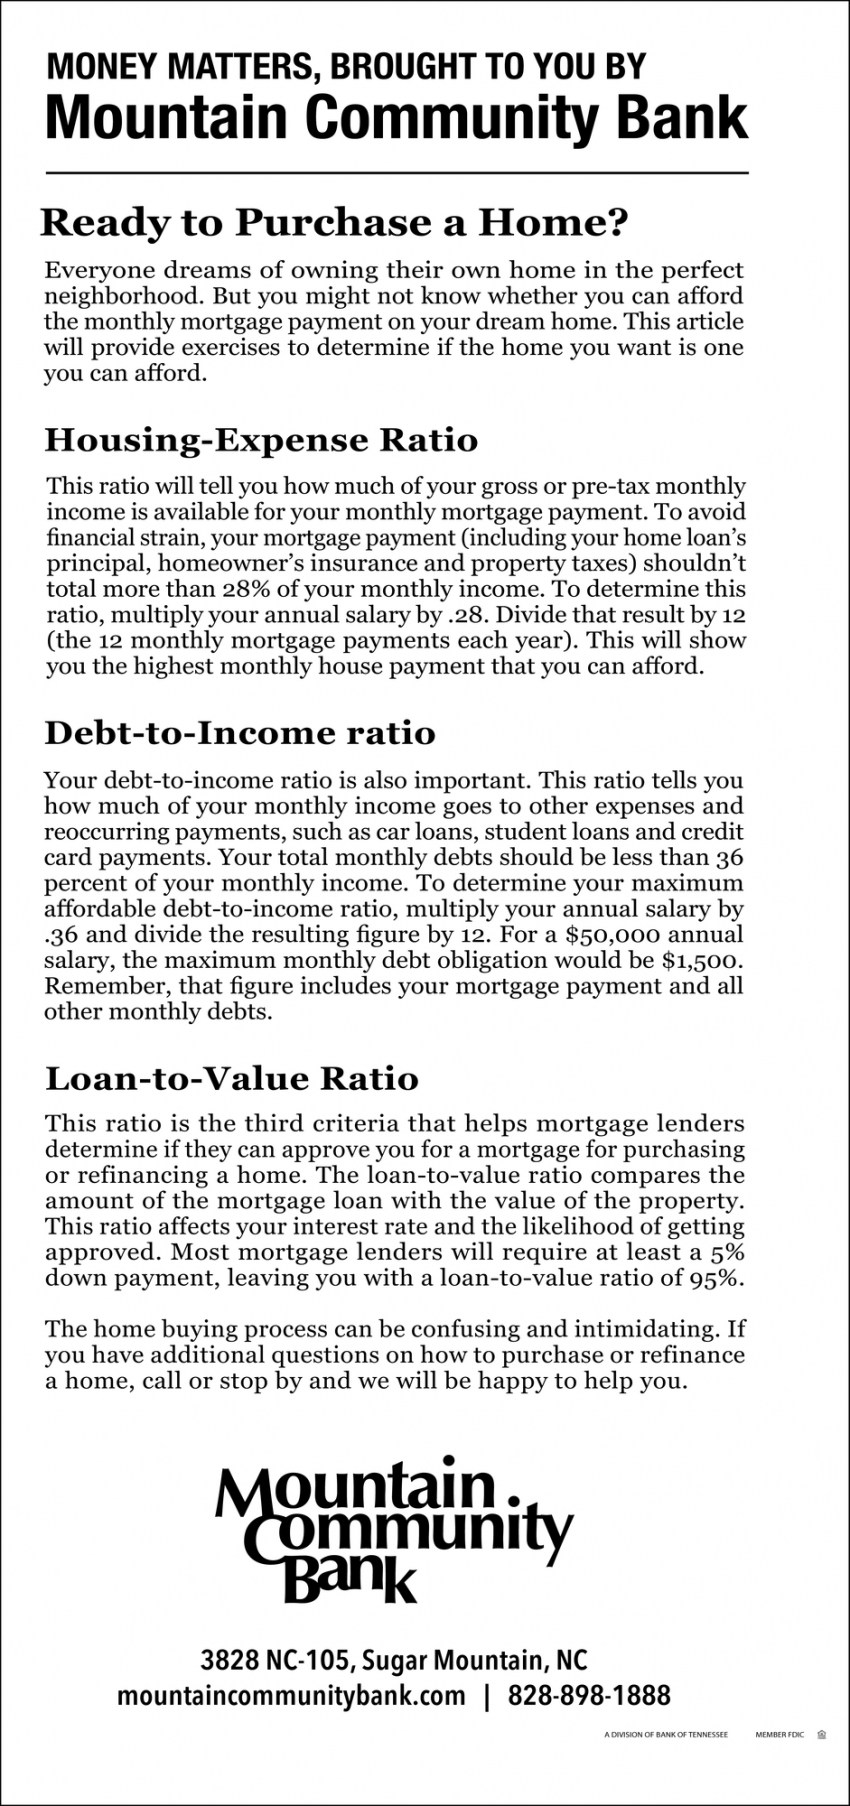 Ready To Purchase A Home?